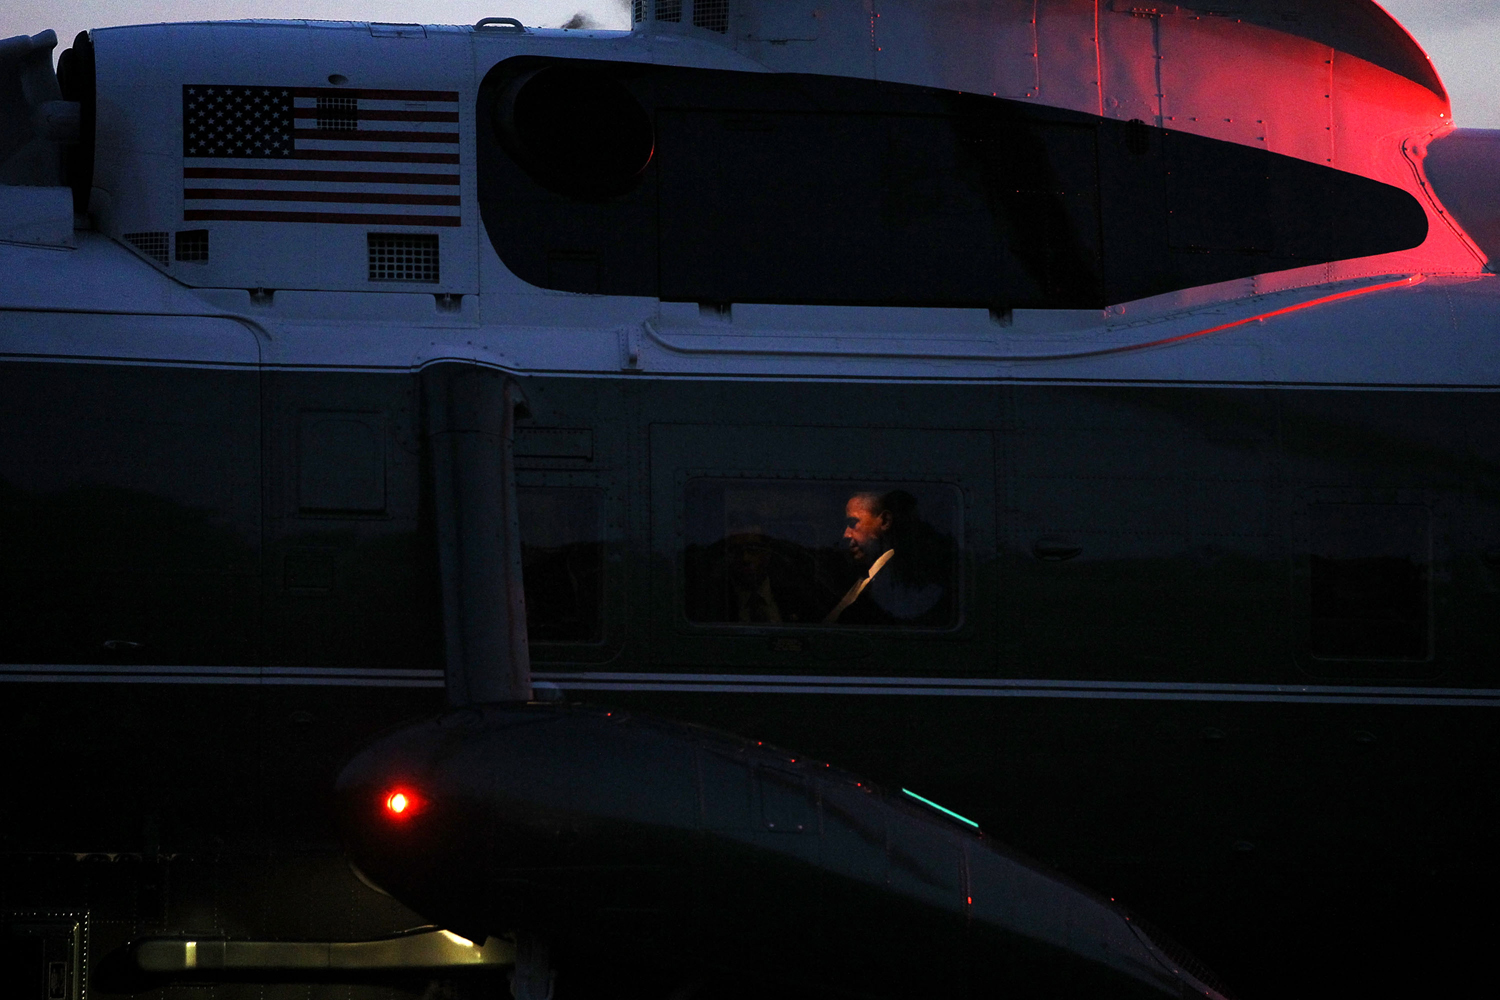 Image: Oct. 23, 2012. U.S. President Barack Obama sits aboard Marine One as it lands on the South Lawn of the White House in Washington, D.C.